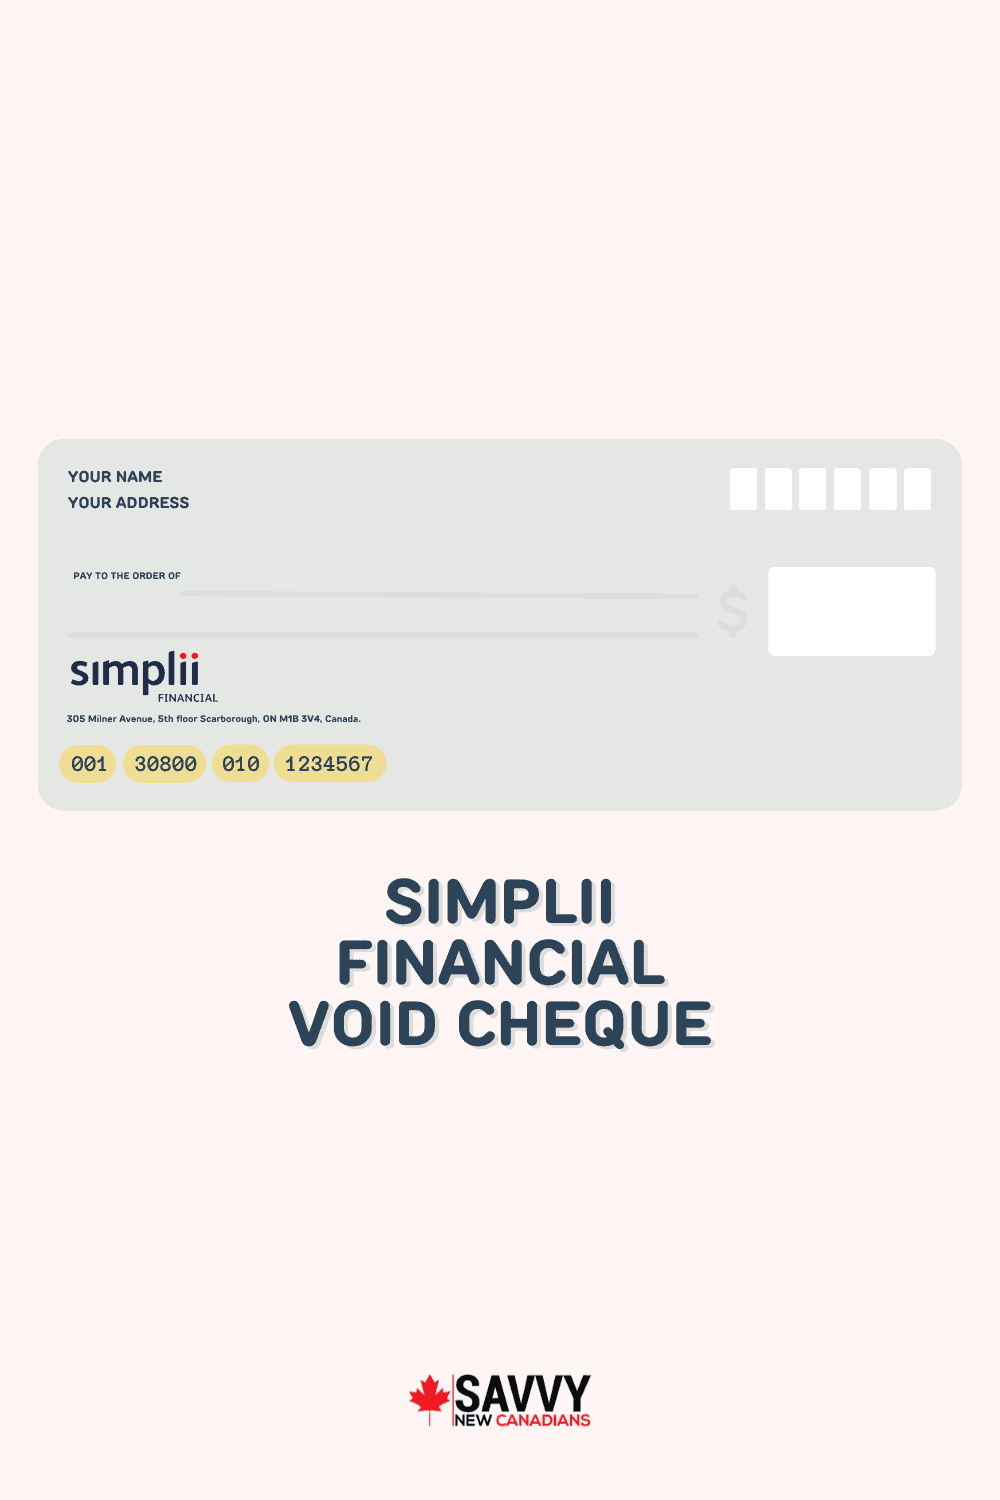 Simplii Financial Void Cheque: How To Read and Print a Simplii Void Cheque